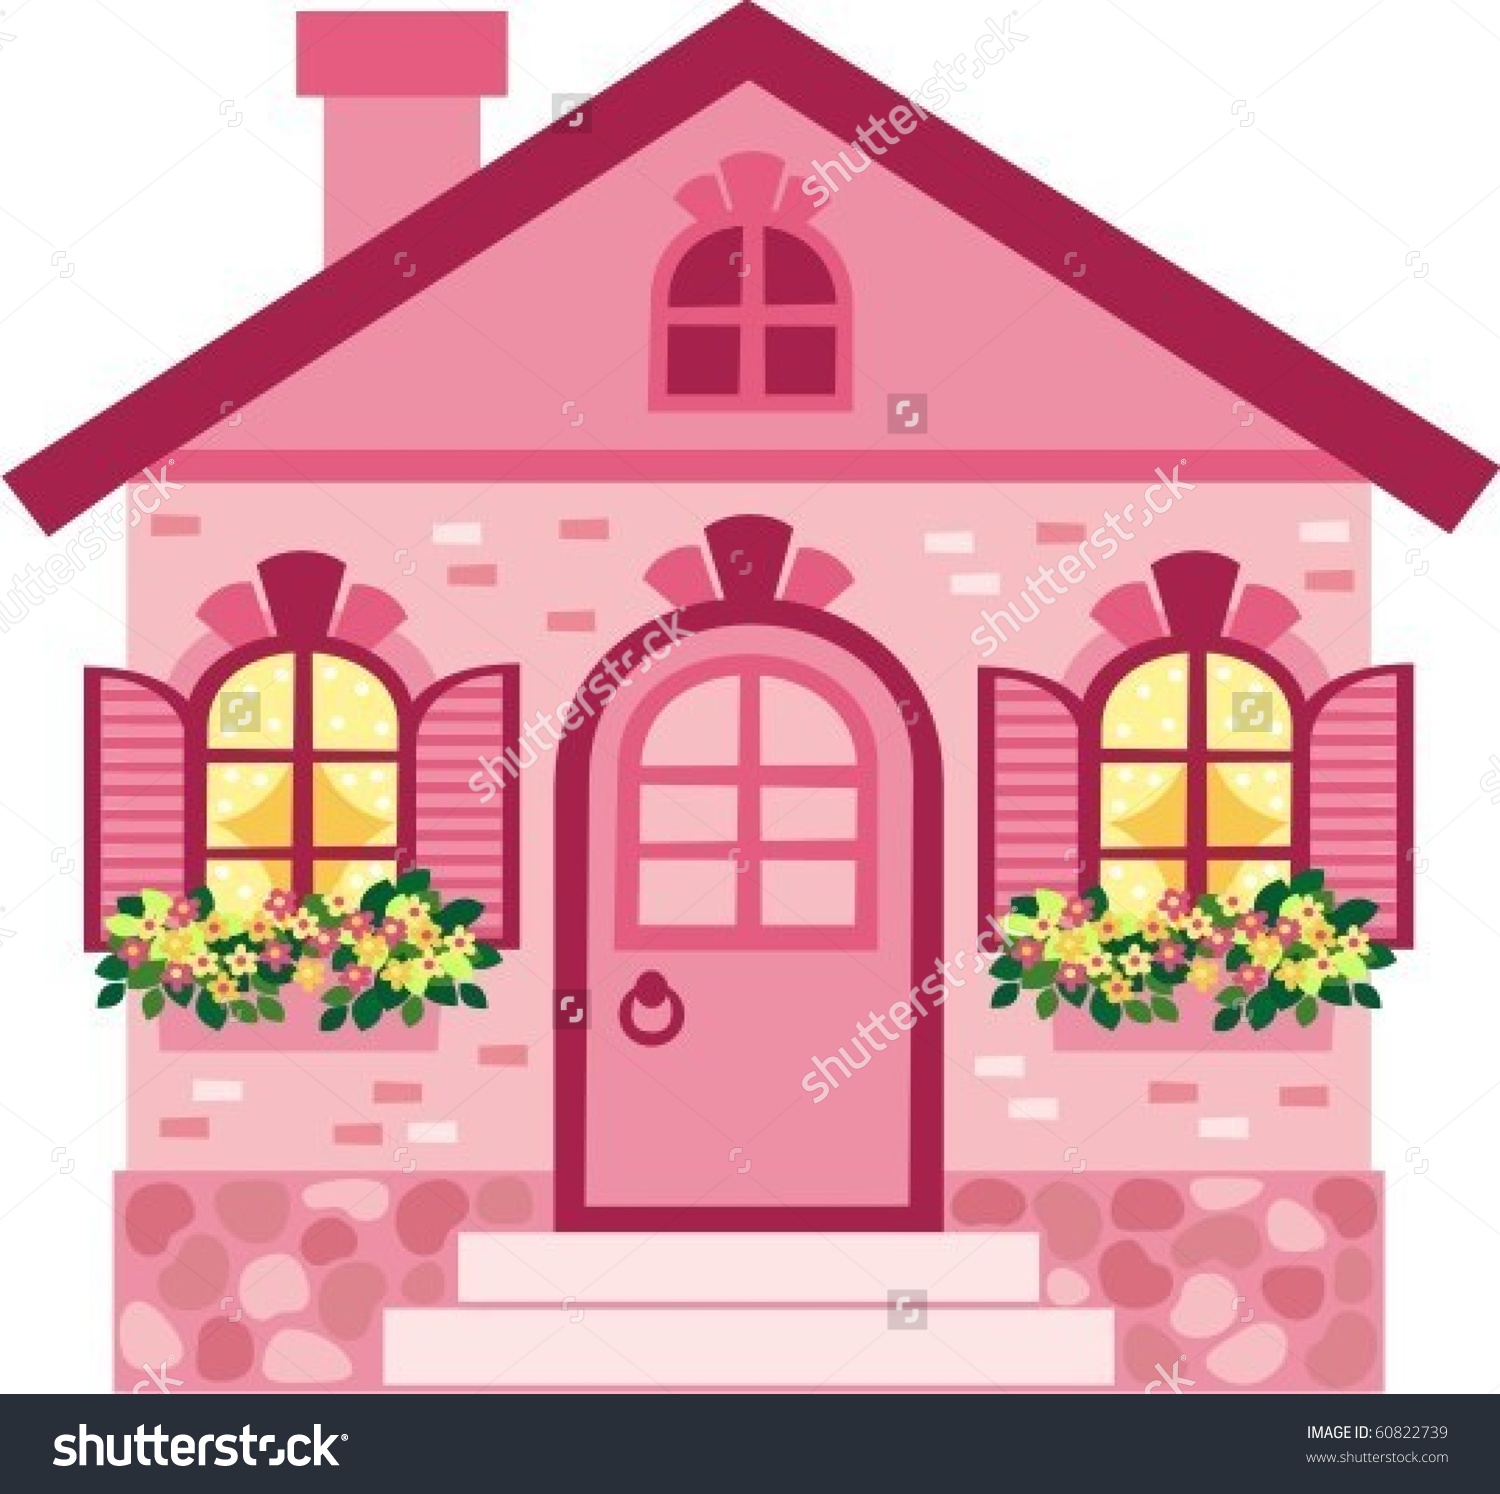 clipart house furniture - photo #23